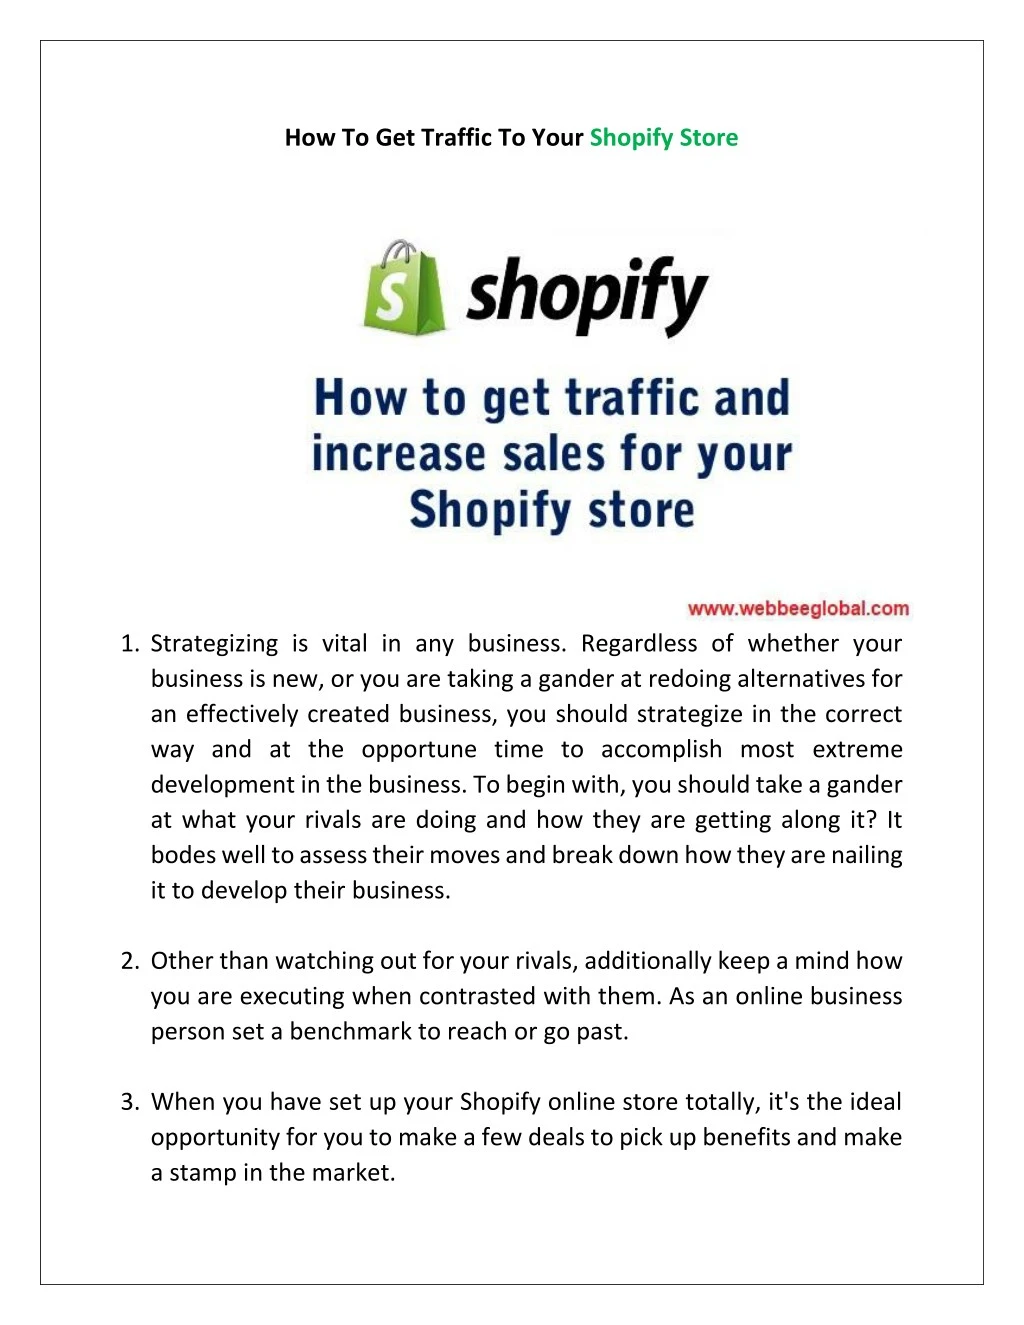 how to get traffic to your shopify store